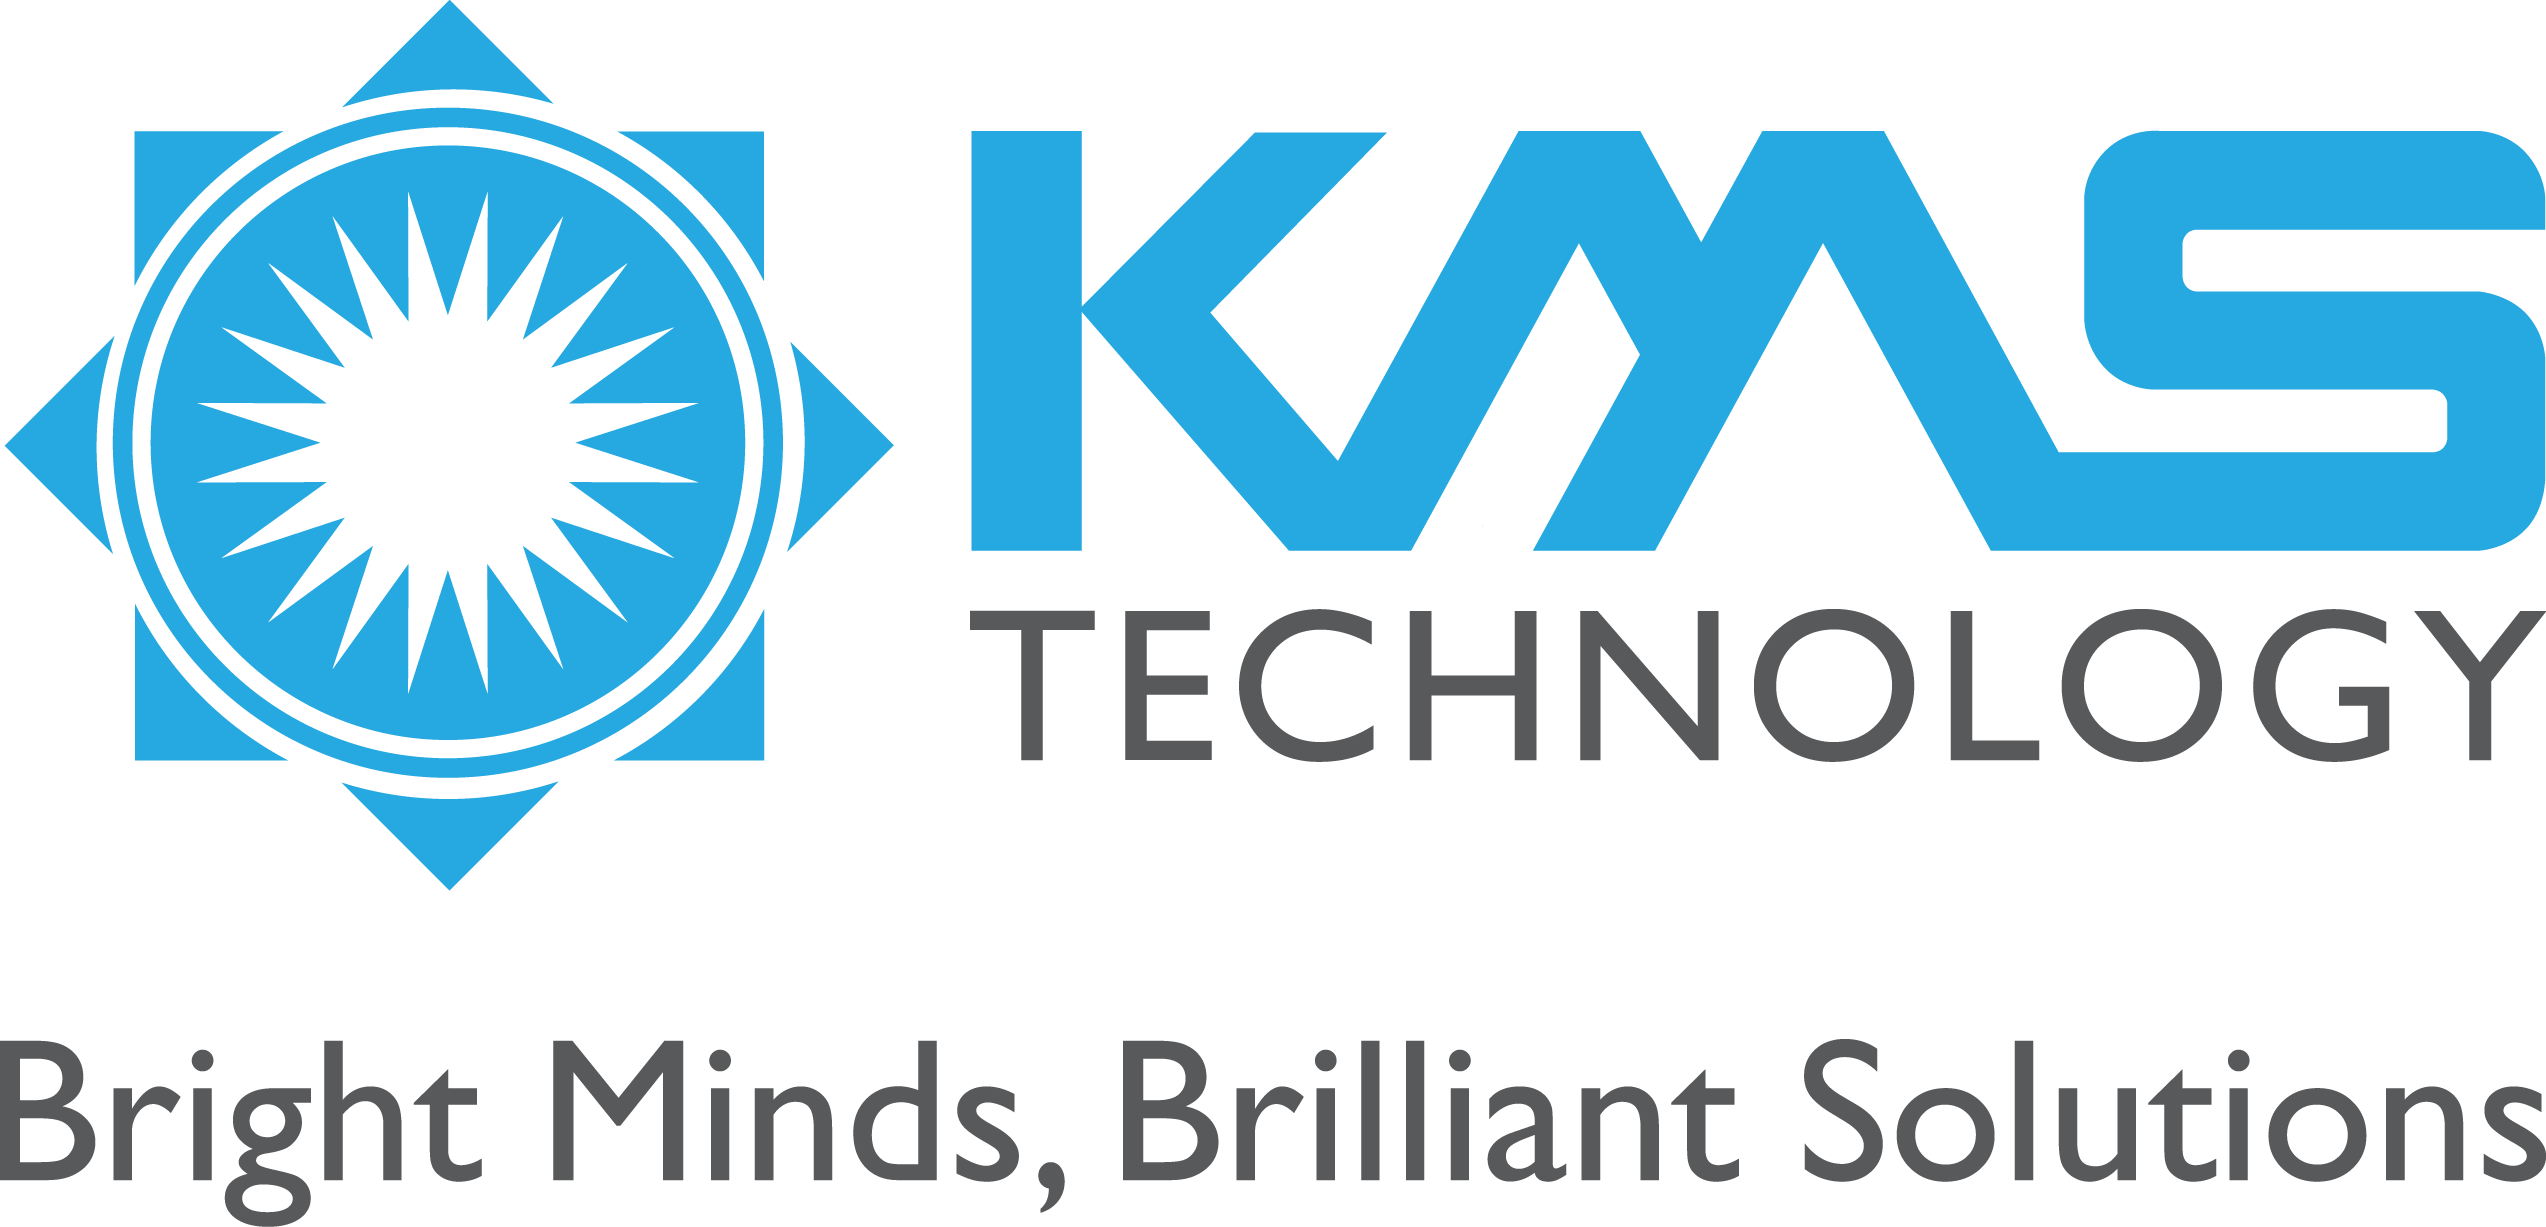 KMS-Technology-Logo.png